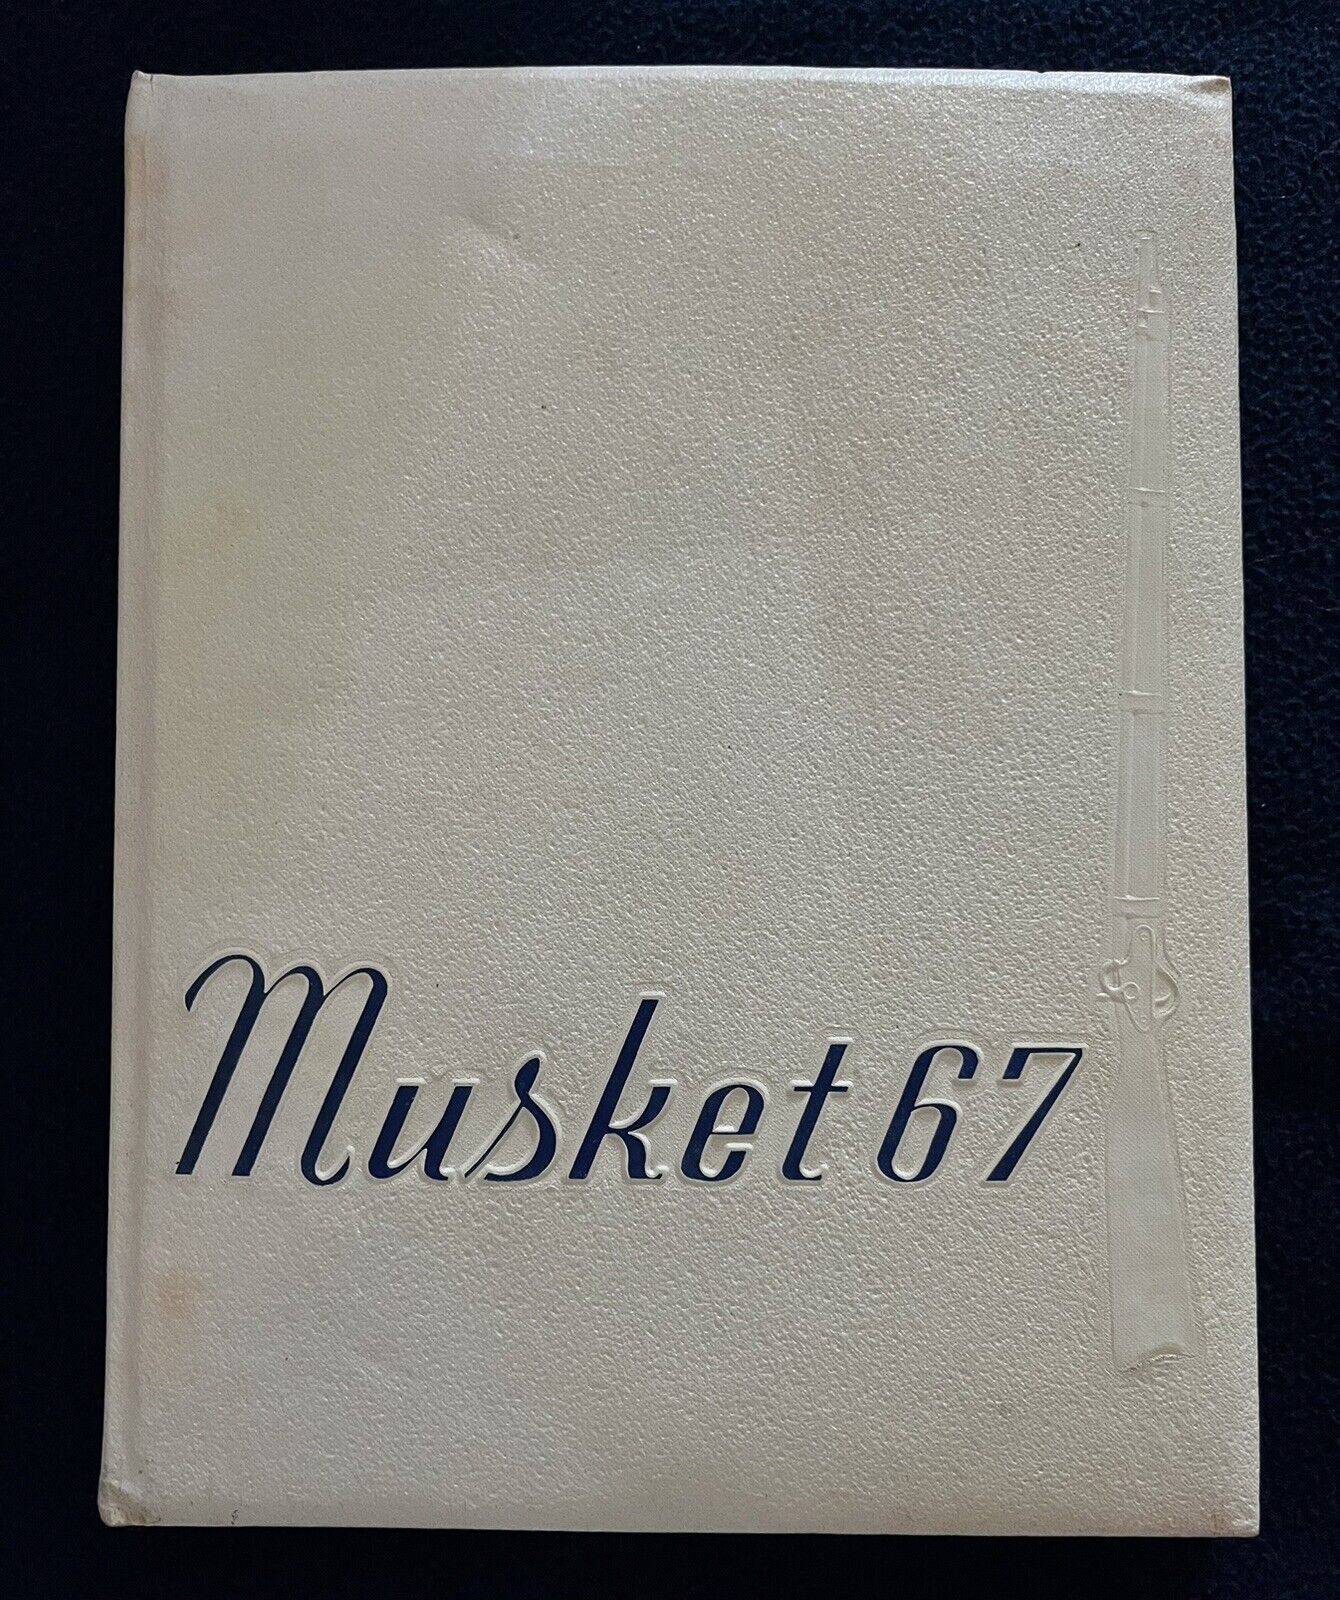 Washington Township 1967 High School Yearbook Muskets Sewell New Jersey